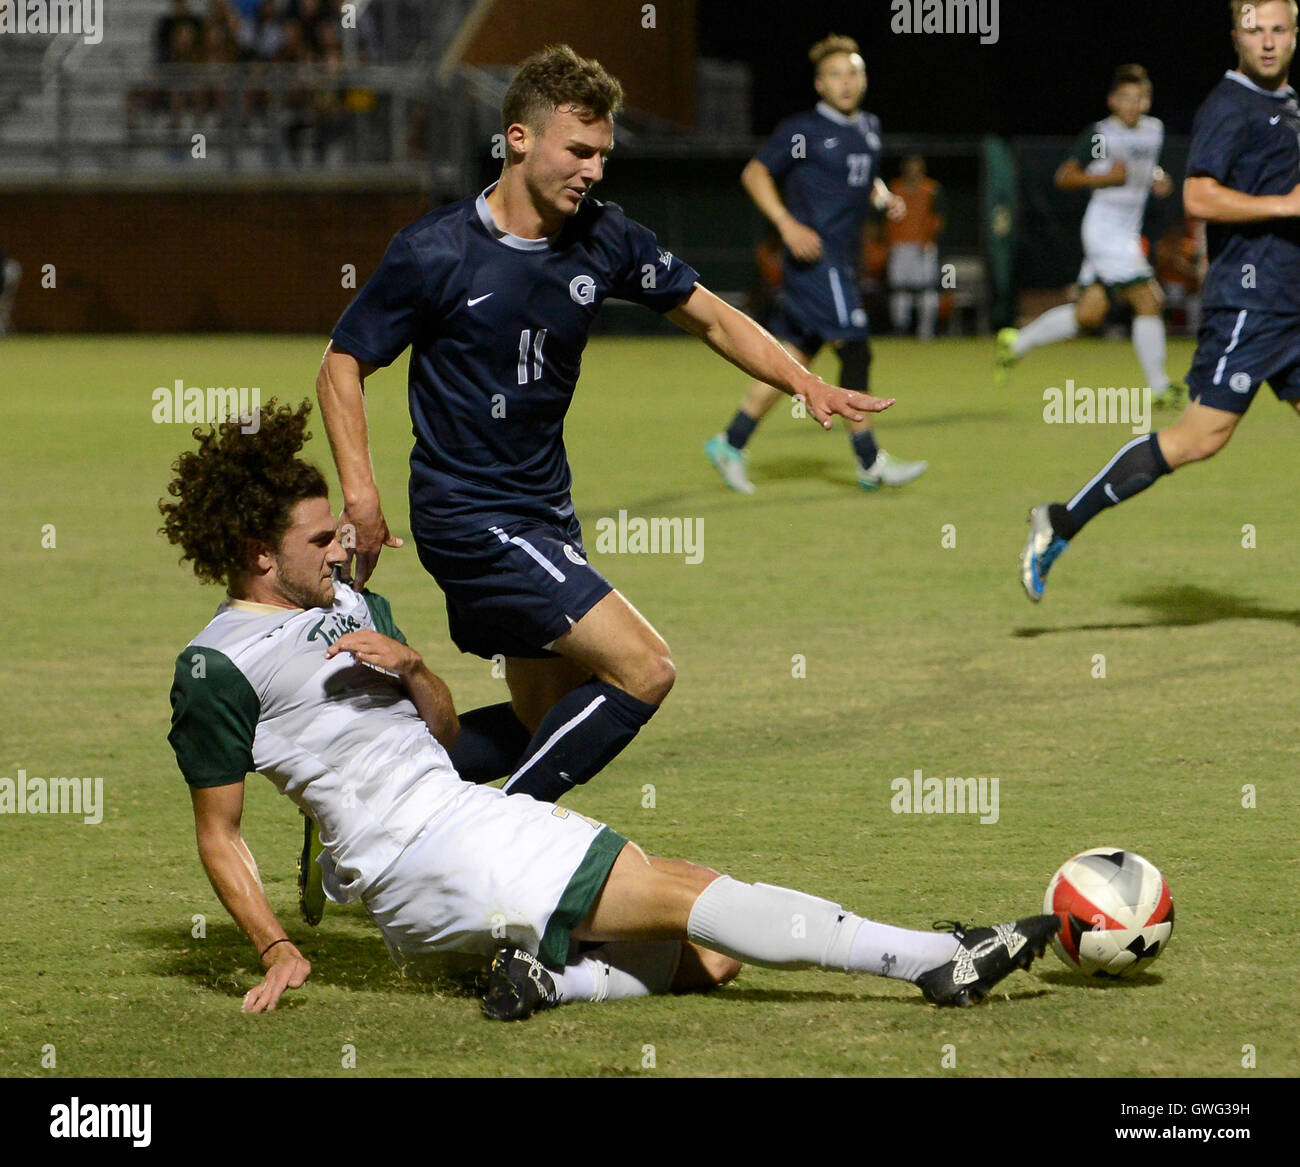 Williamsburg, VA, USA. 13th Sep, 2016. 20160913 - William and Mary forward REILLY MAW (7), bottom, breaks up an advance by Georgetown midfielder MATTHEW LEDDER (11) in the first half at Martin Family Stadium in Williamsburg, Va. © Chuck Myers/ZUMA Wire/Alamy Live News Stock Photo